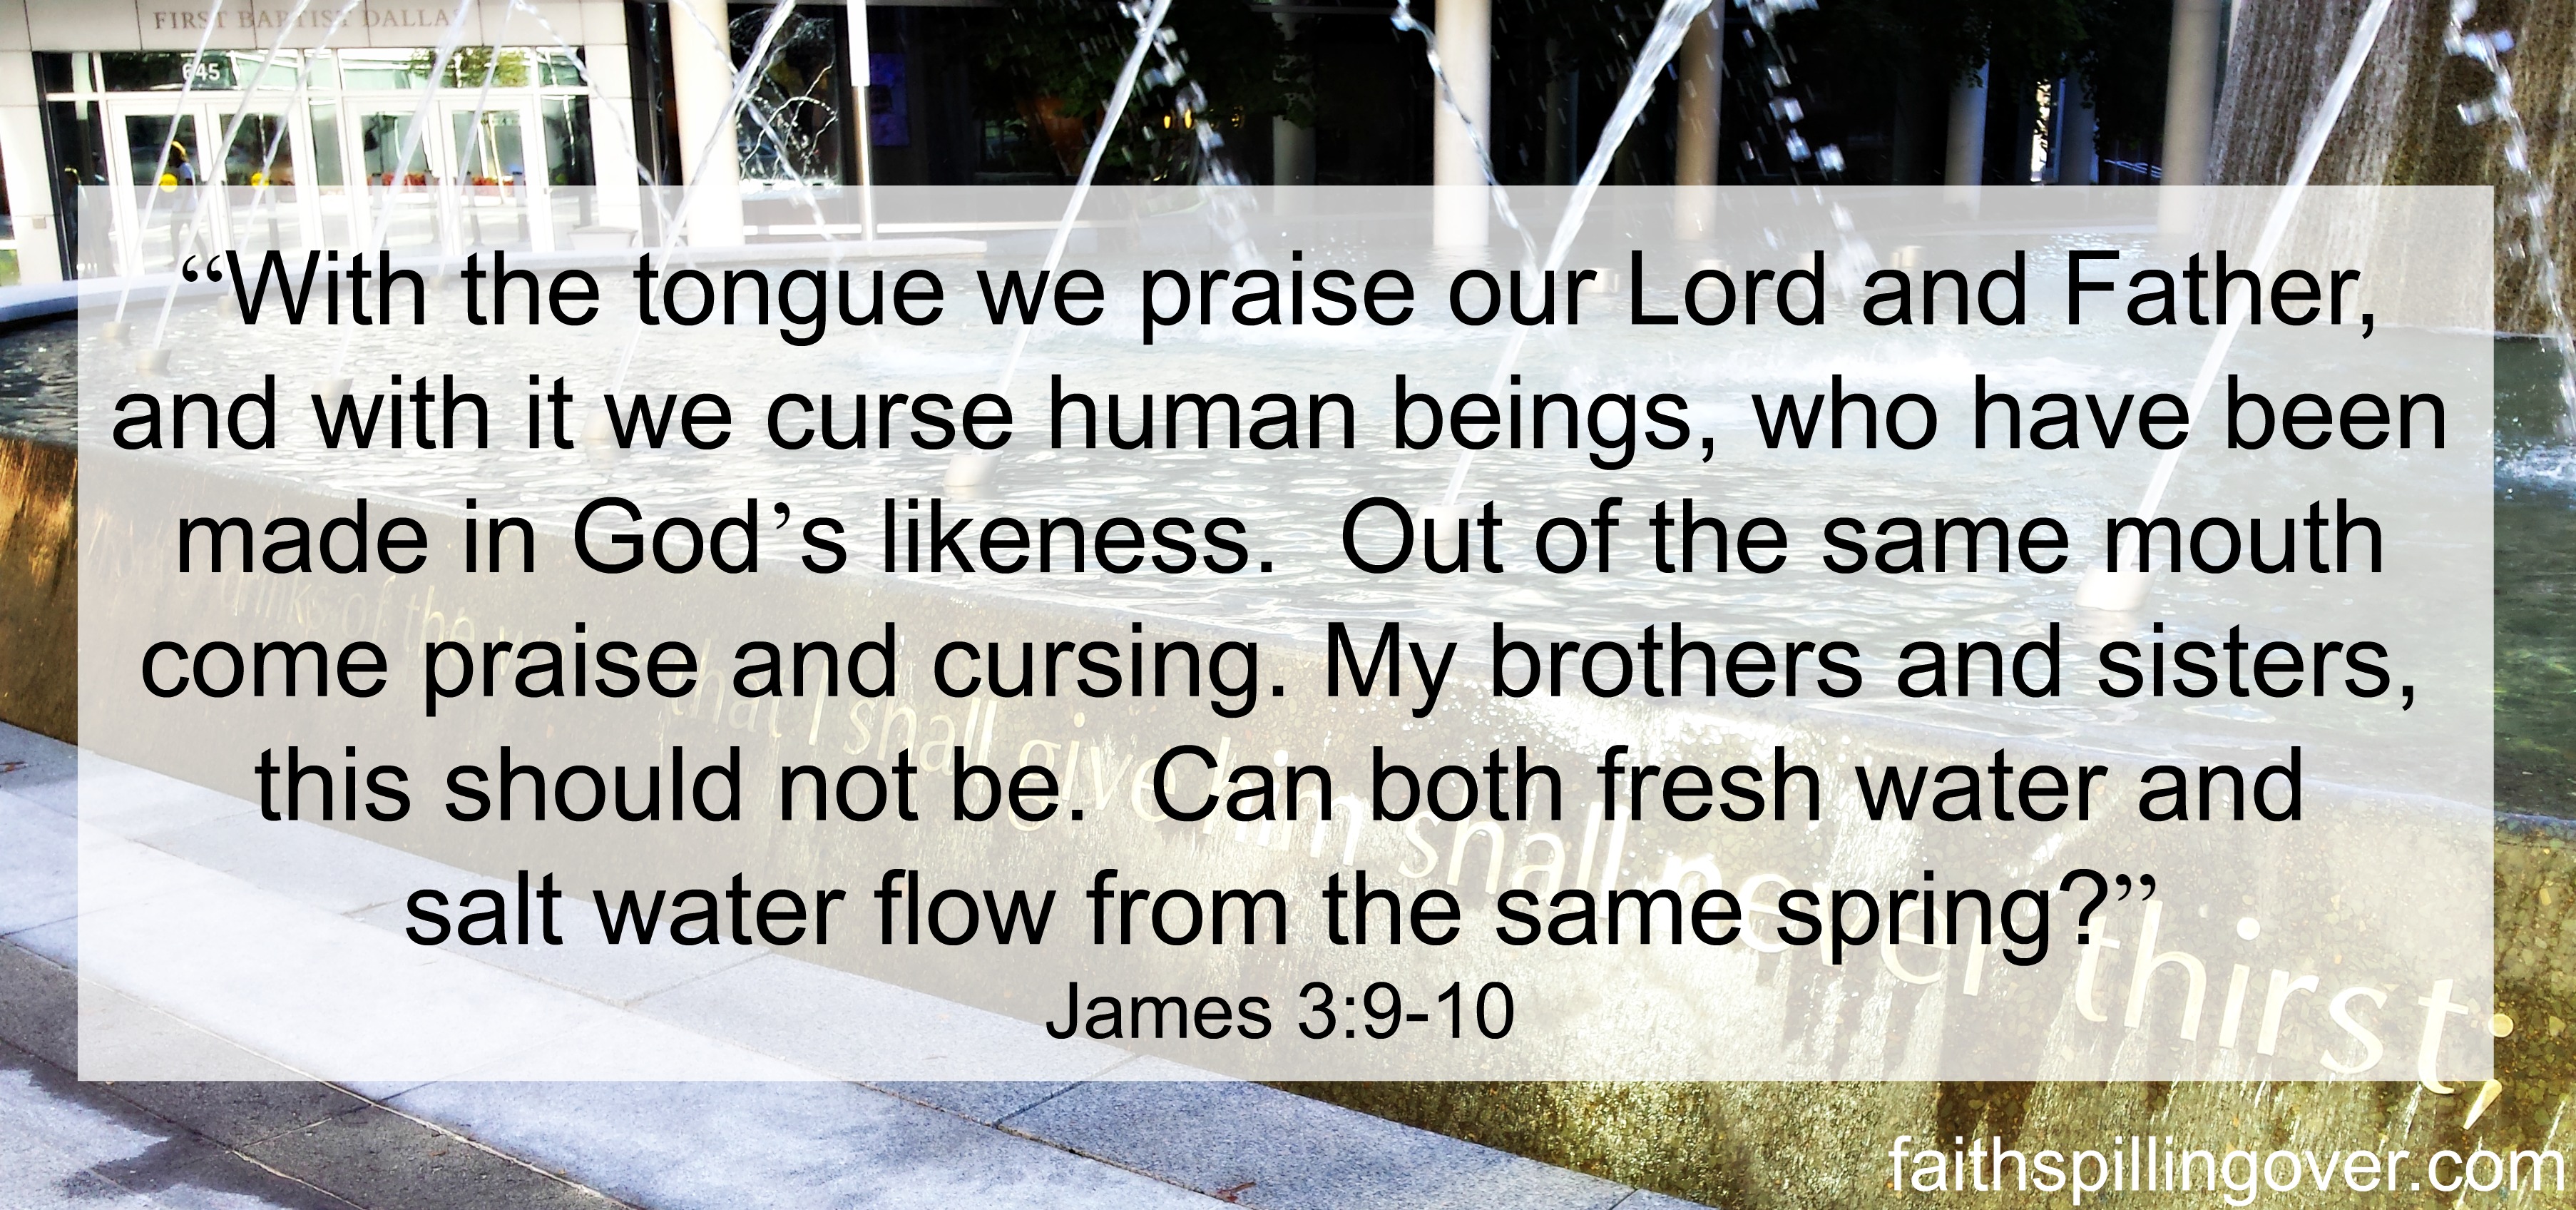 Hope for fresh water scripture